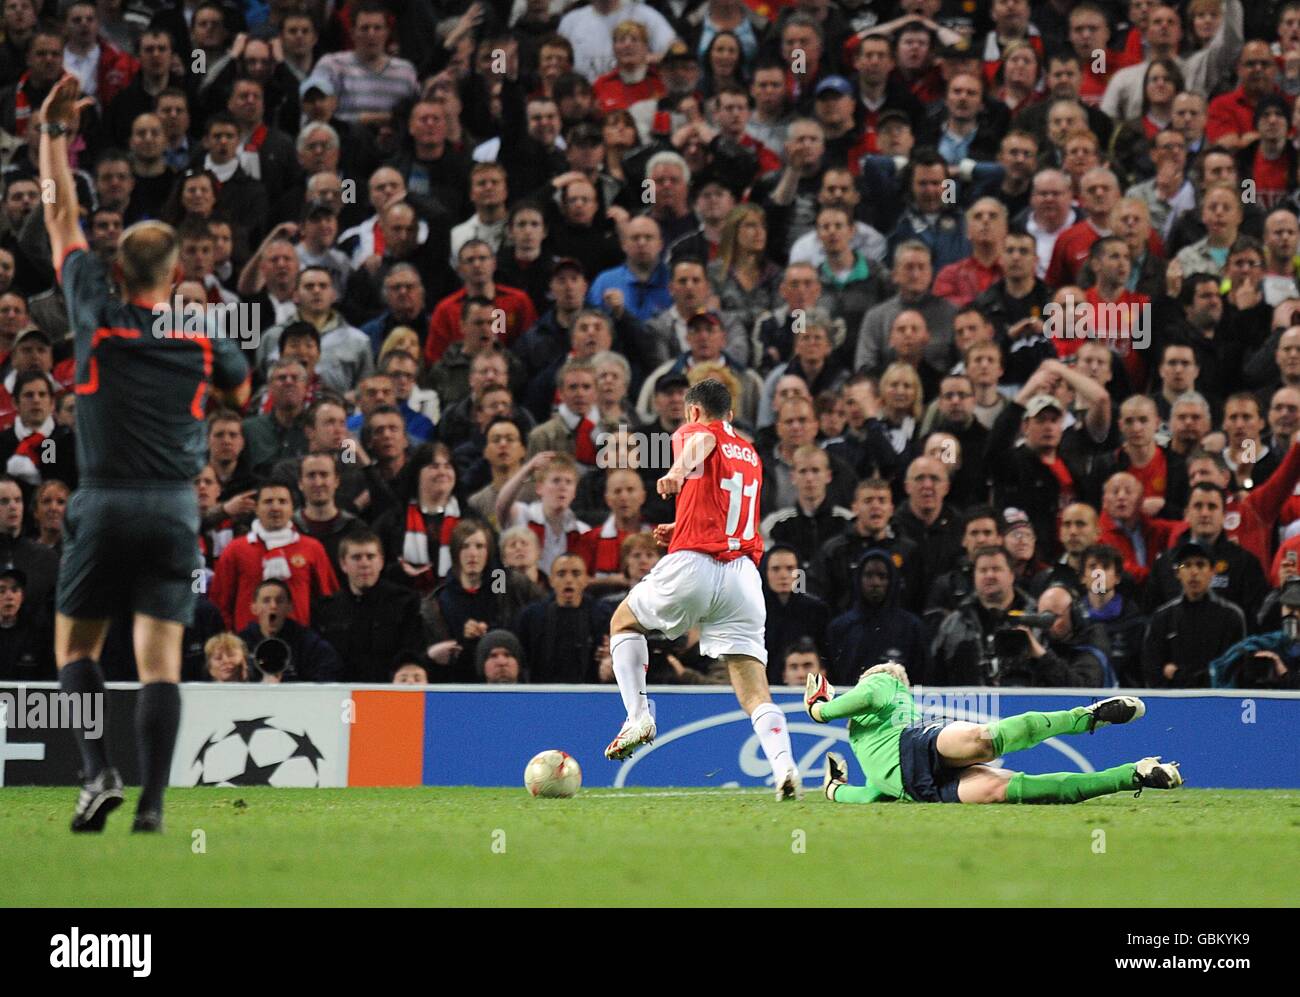 Soccer - UEFA Champions League - Semi Final - First Leg - Manchester United v Arsenal - Old Trafford. Manchester United's Ryan Giggs (centre) has a goal ruled out for offside by referee Claus Bo Larsen (left) Stock Photo